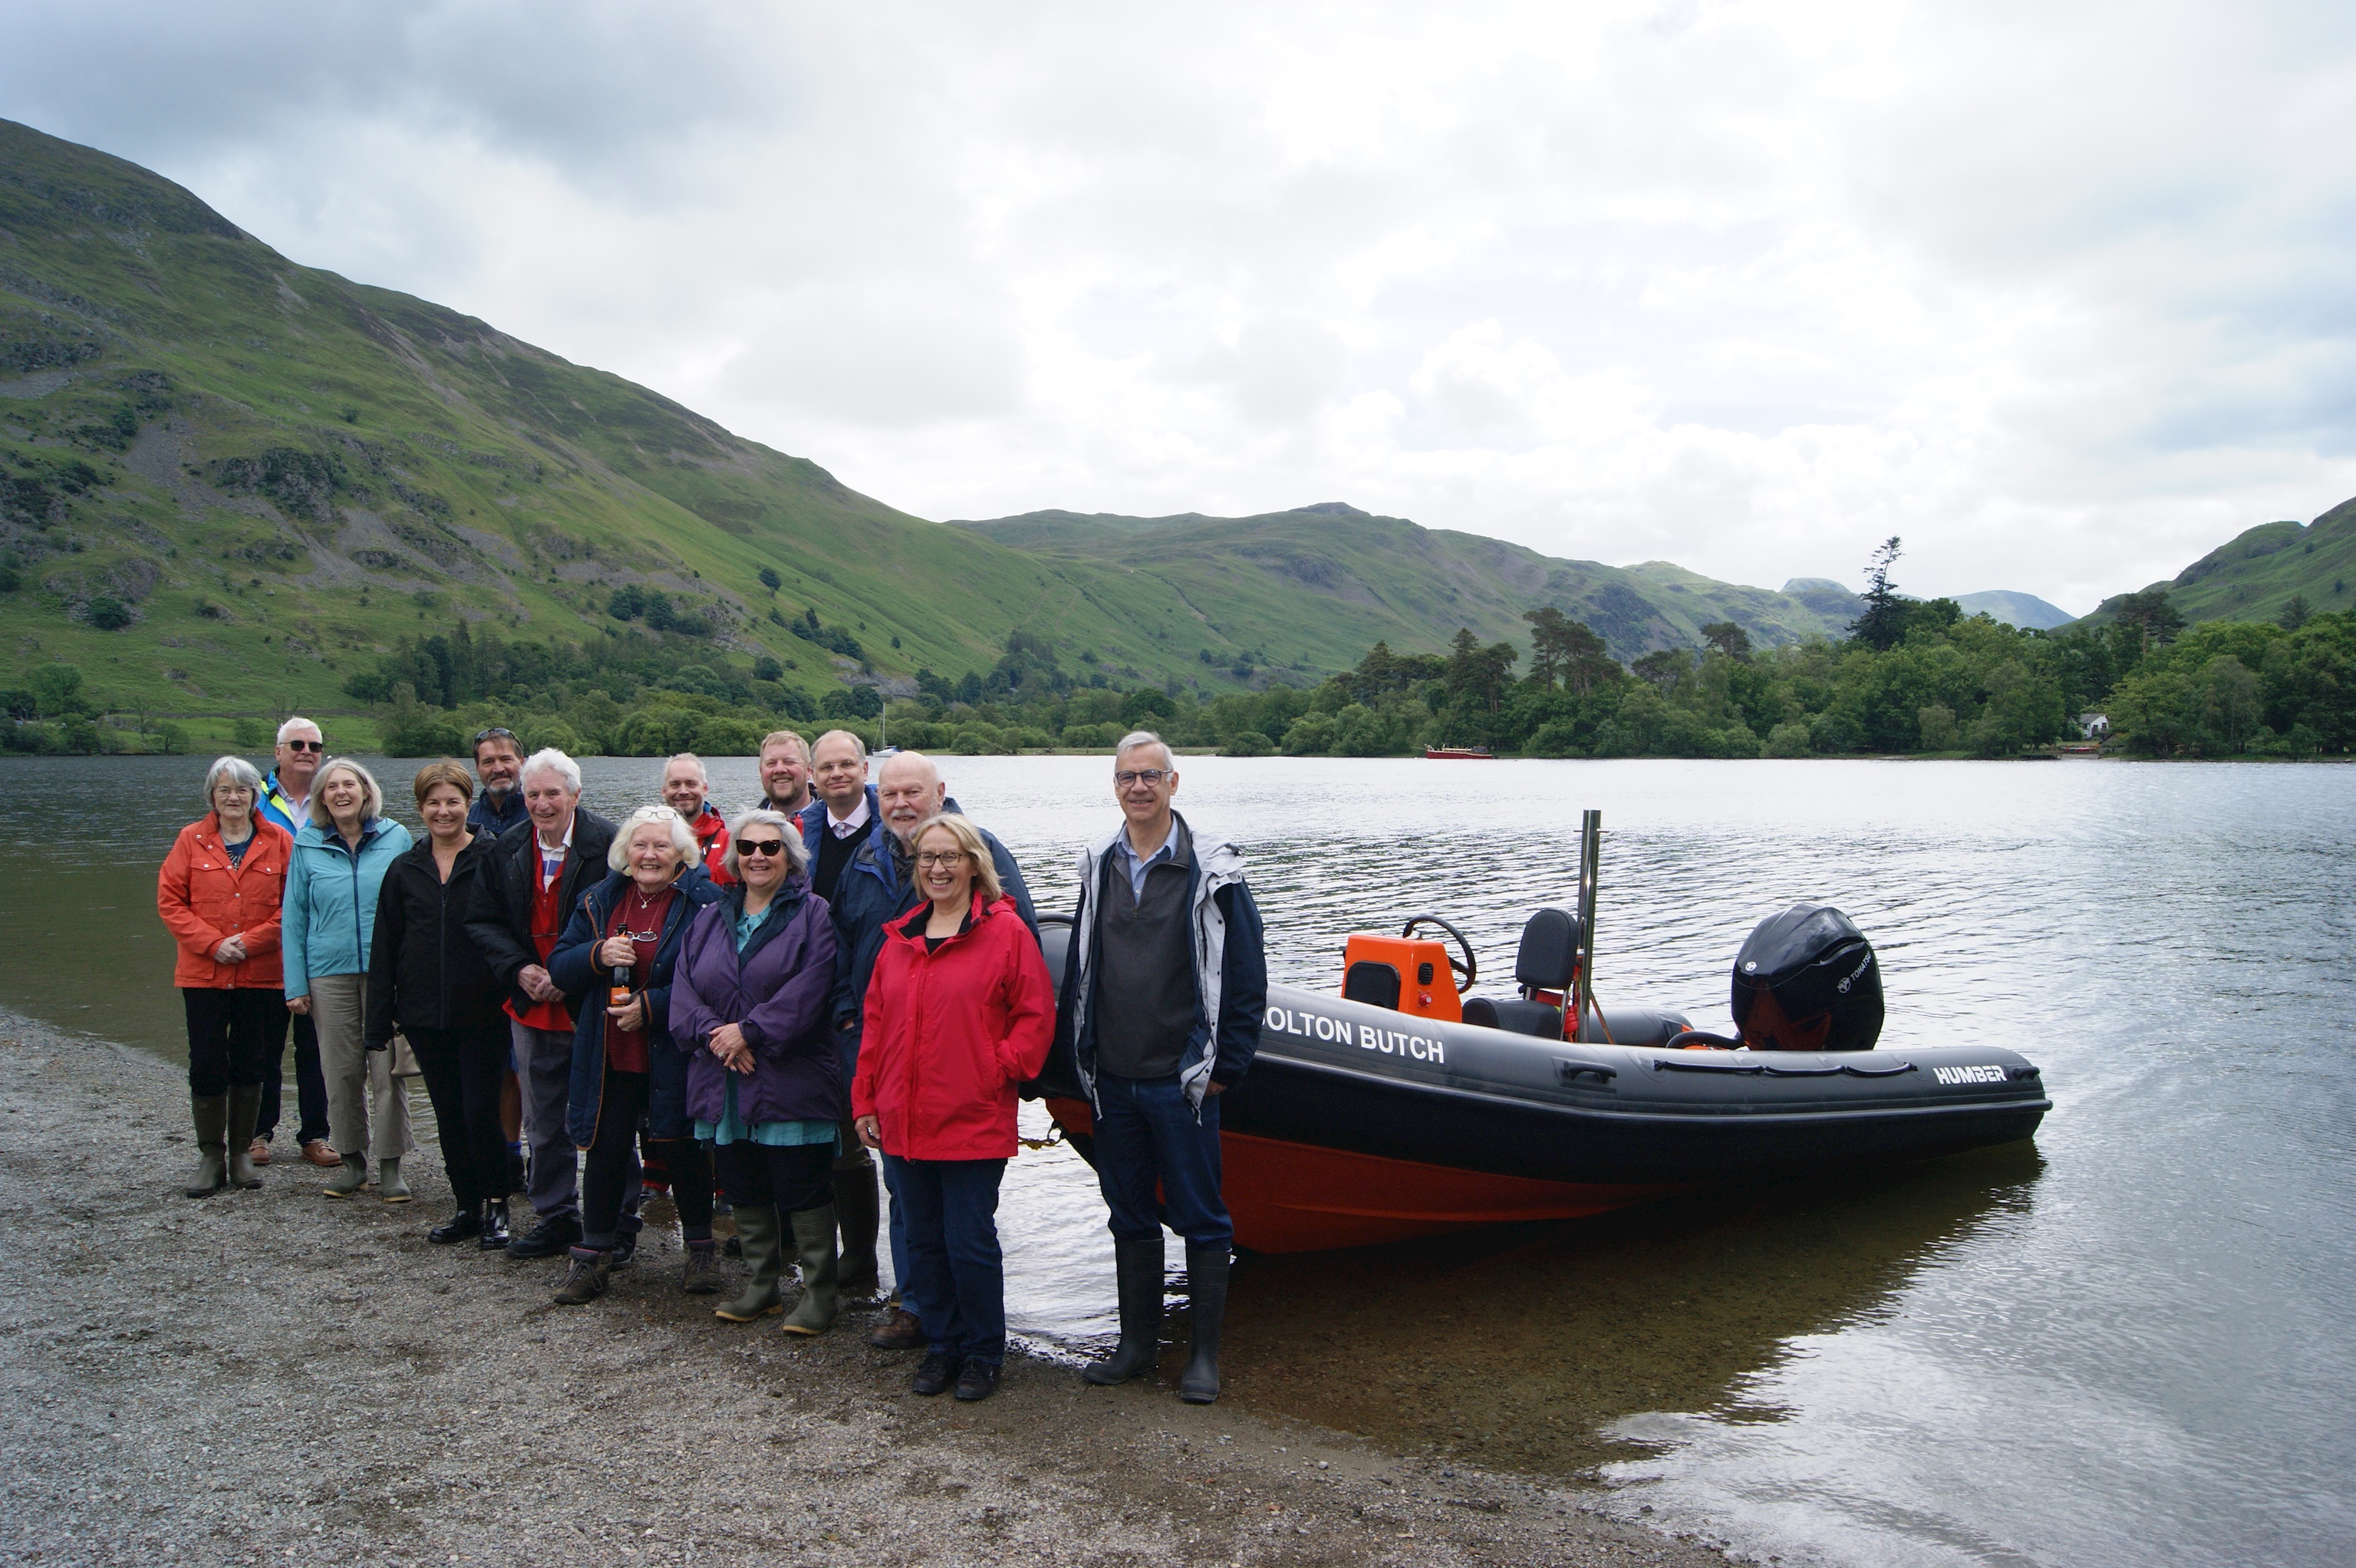 Launch of 'Bolton Butch' on Ullswater